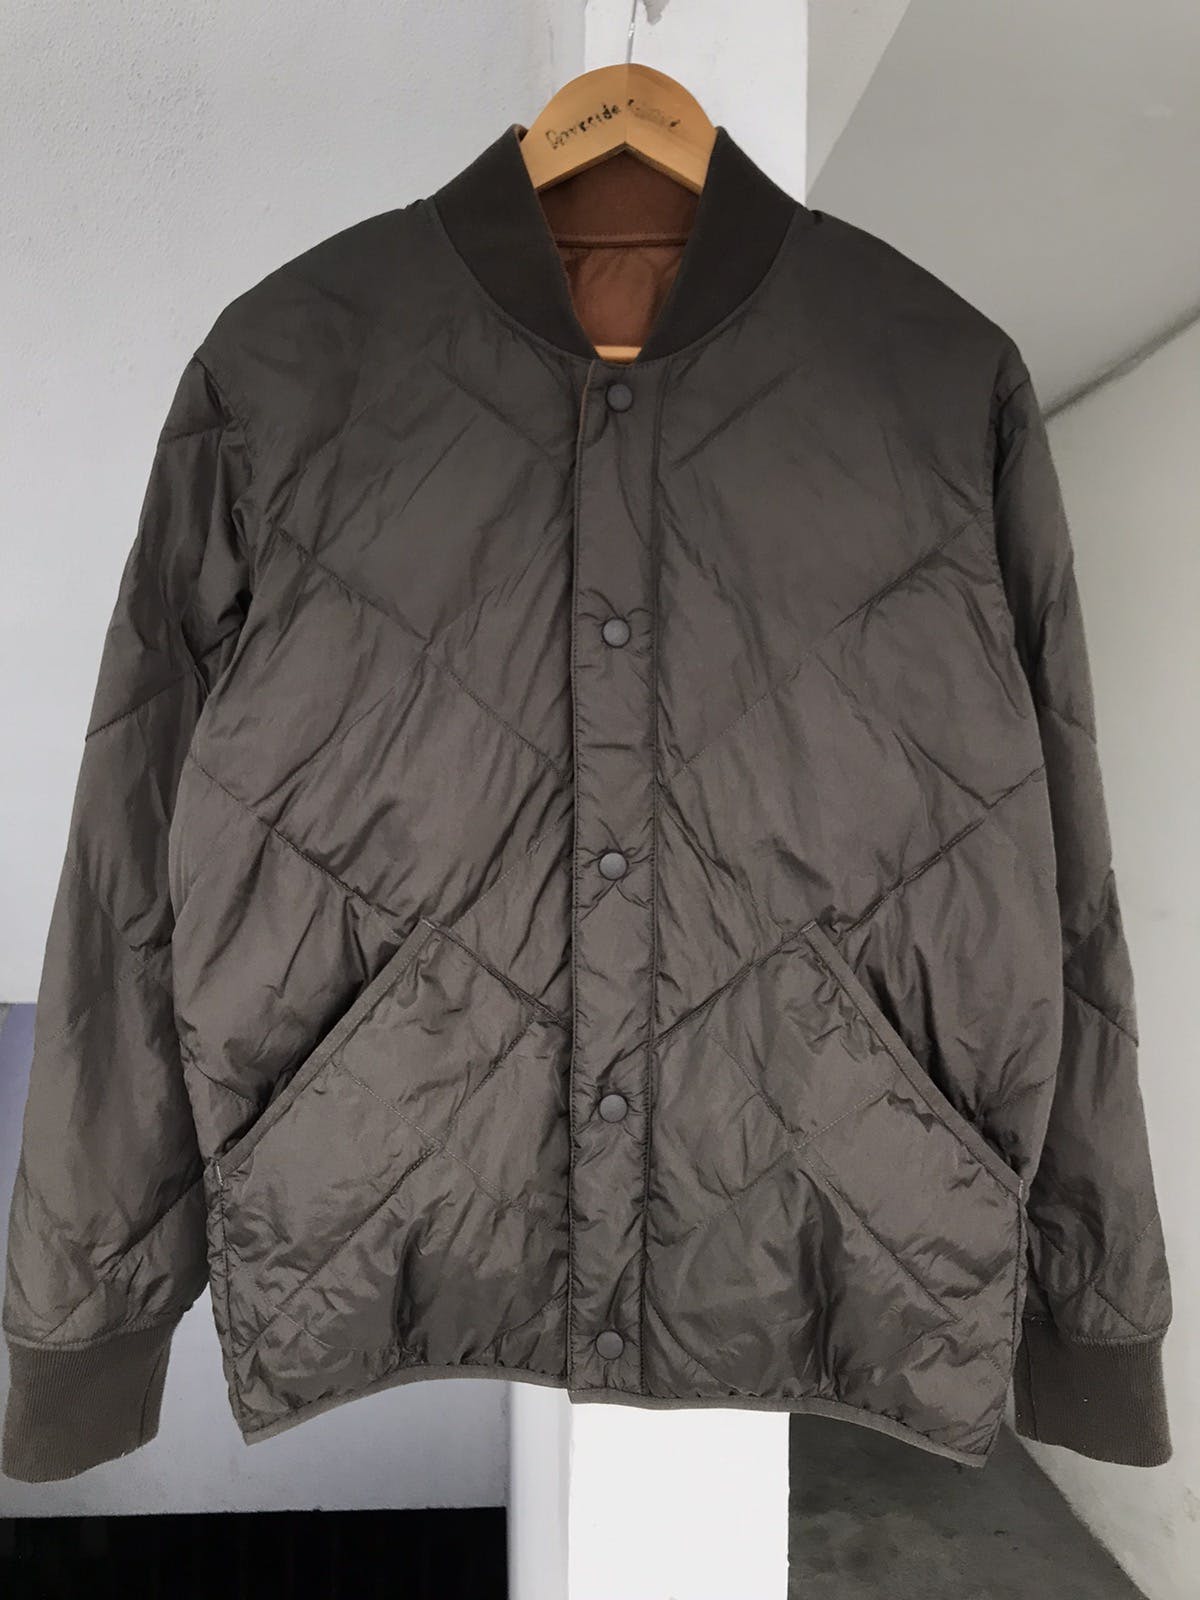 Christopher lemaire x ut Riversible Purffer Jacket - 6